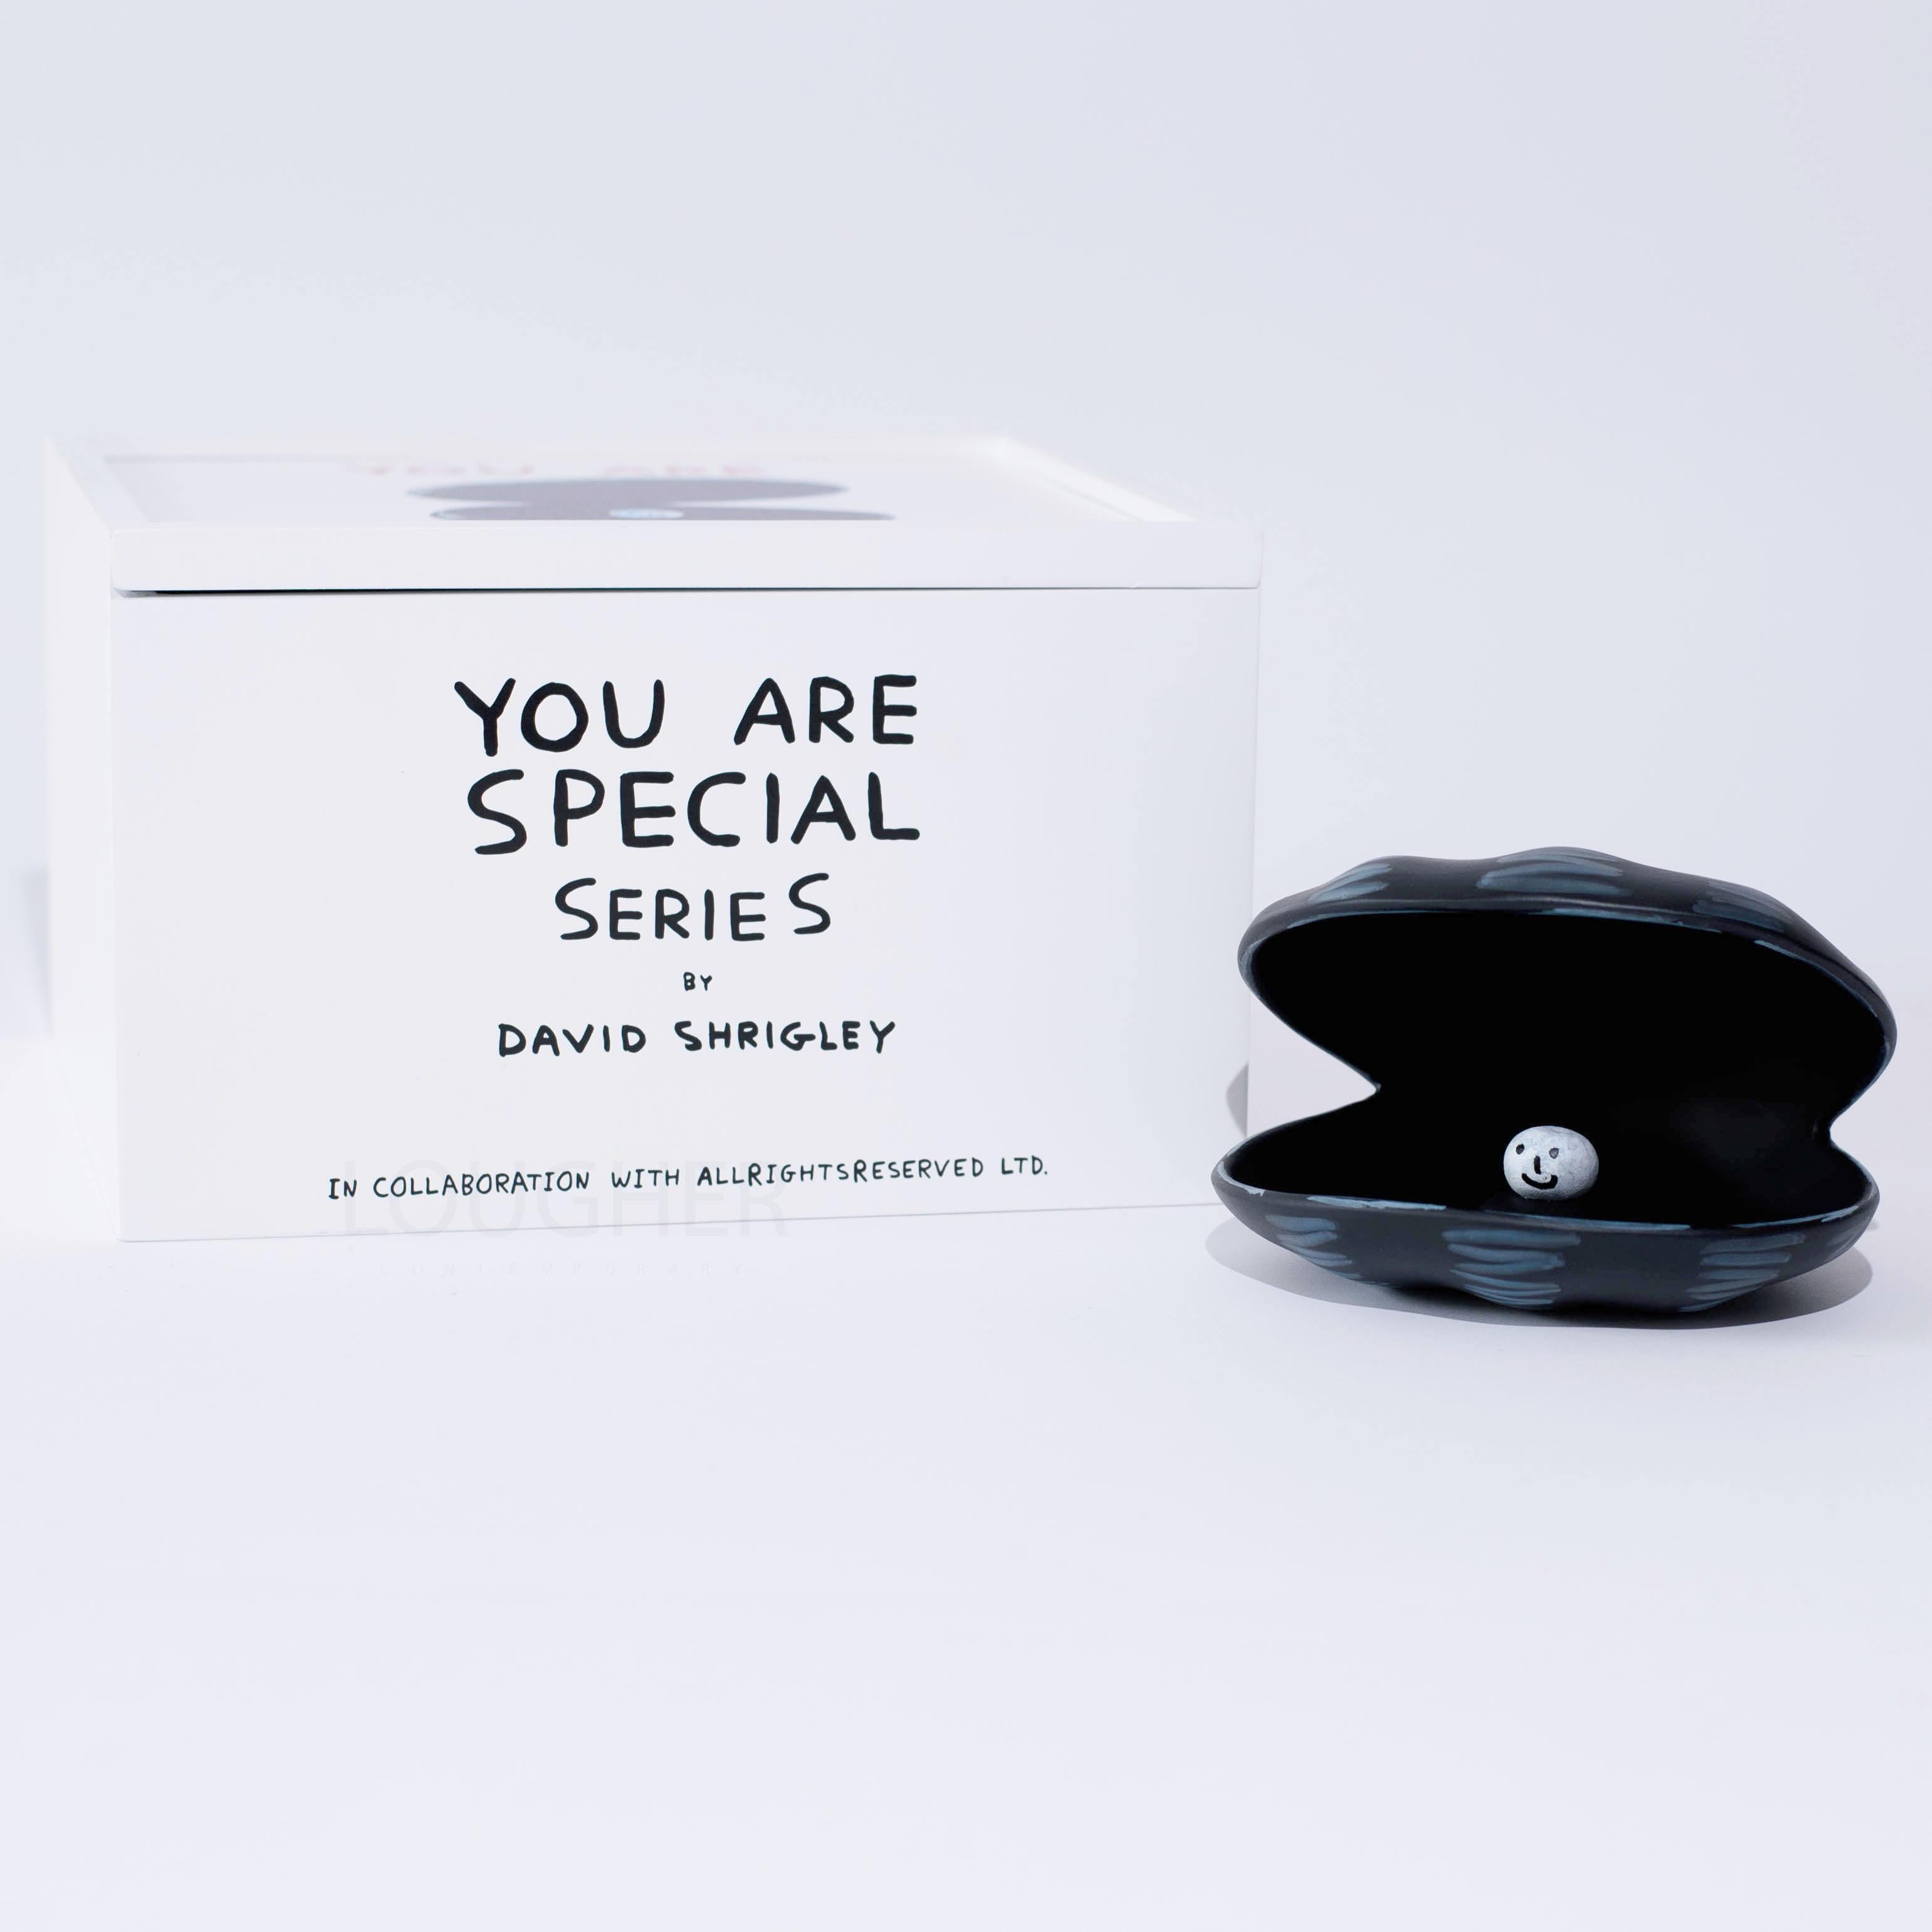 You Are Special - Sculpture by David Shrigley